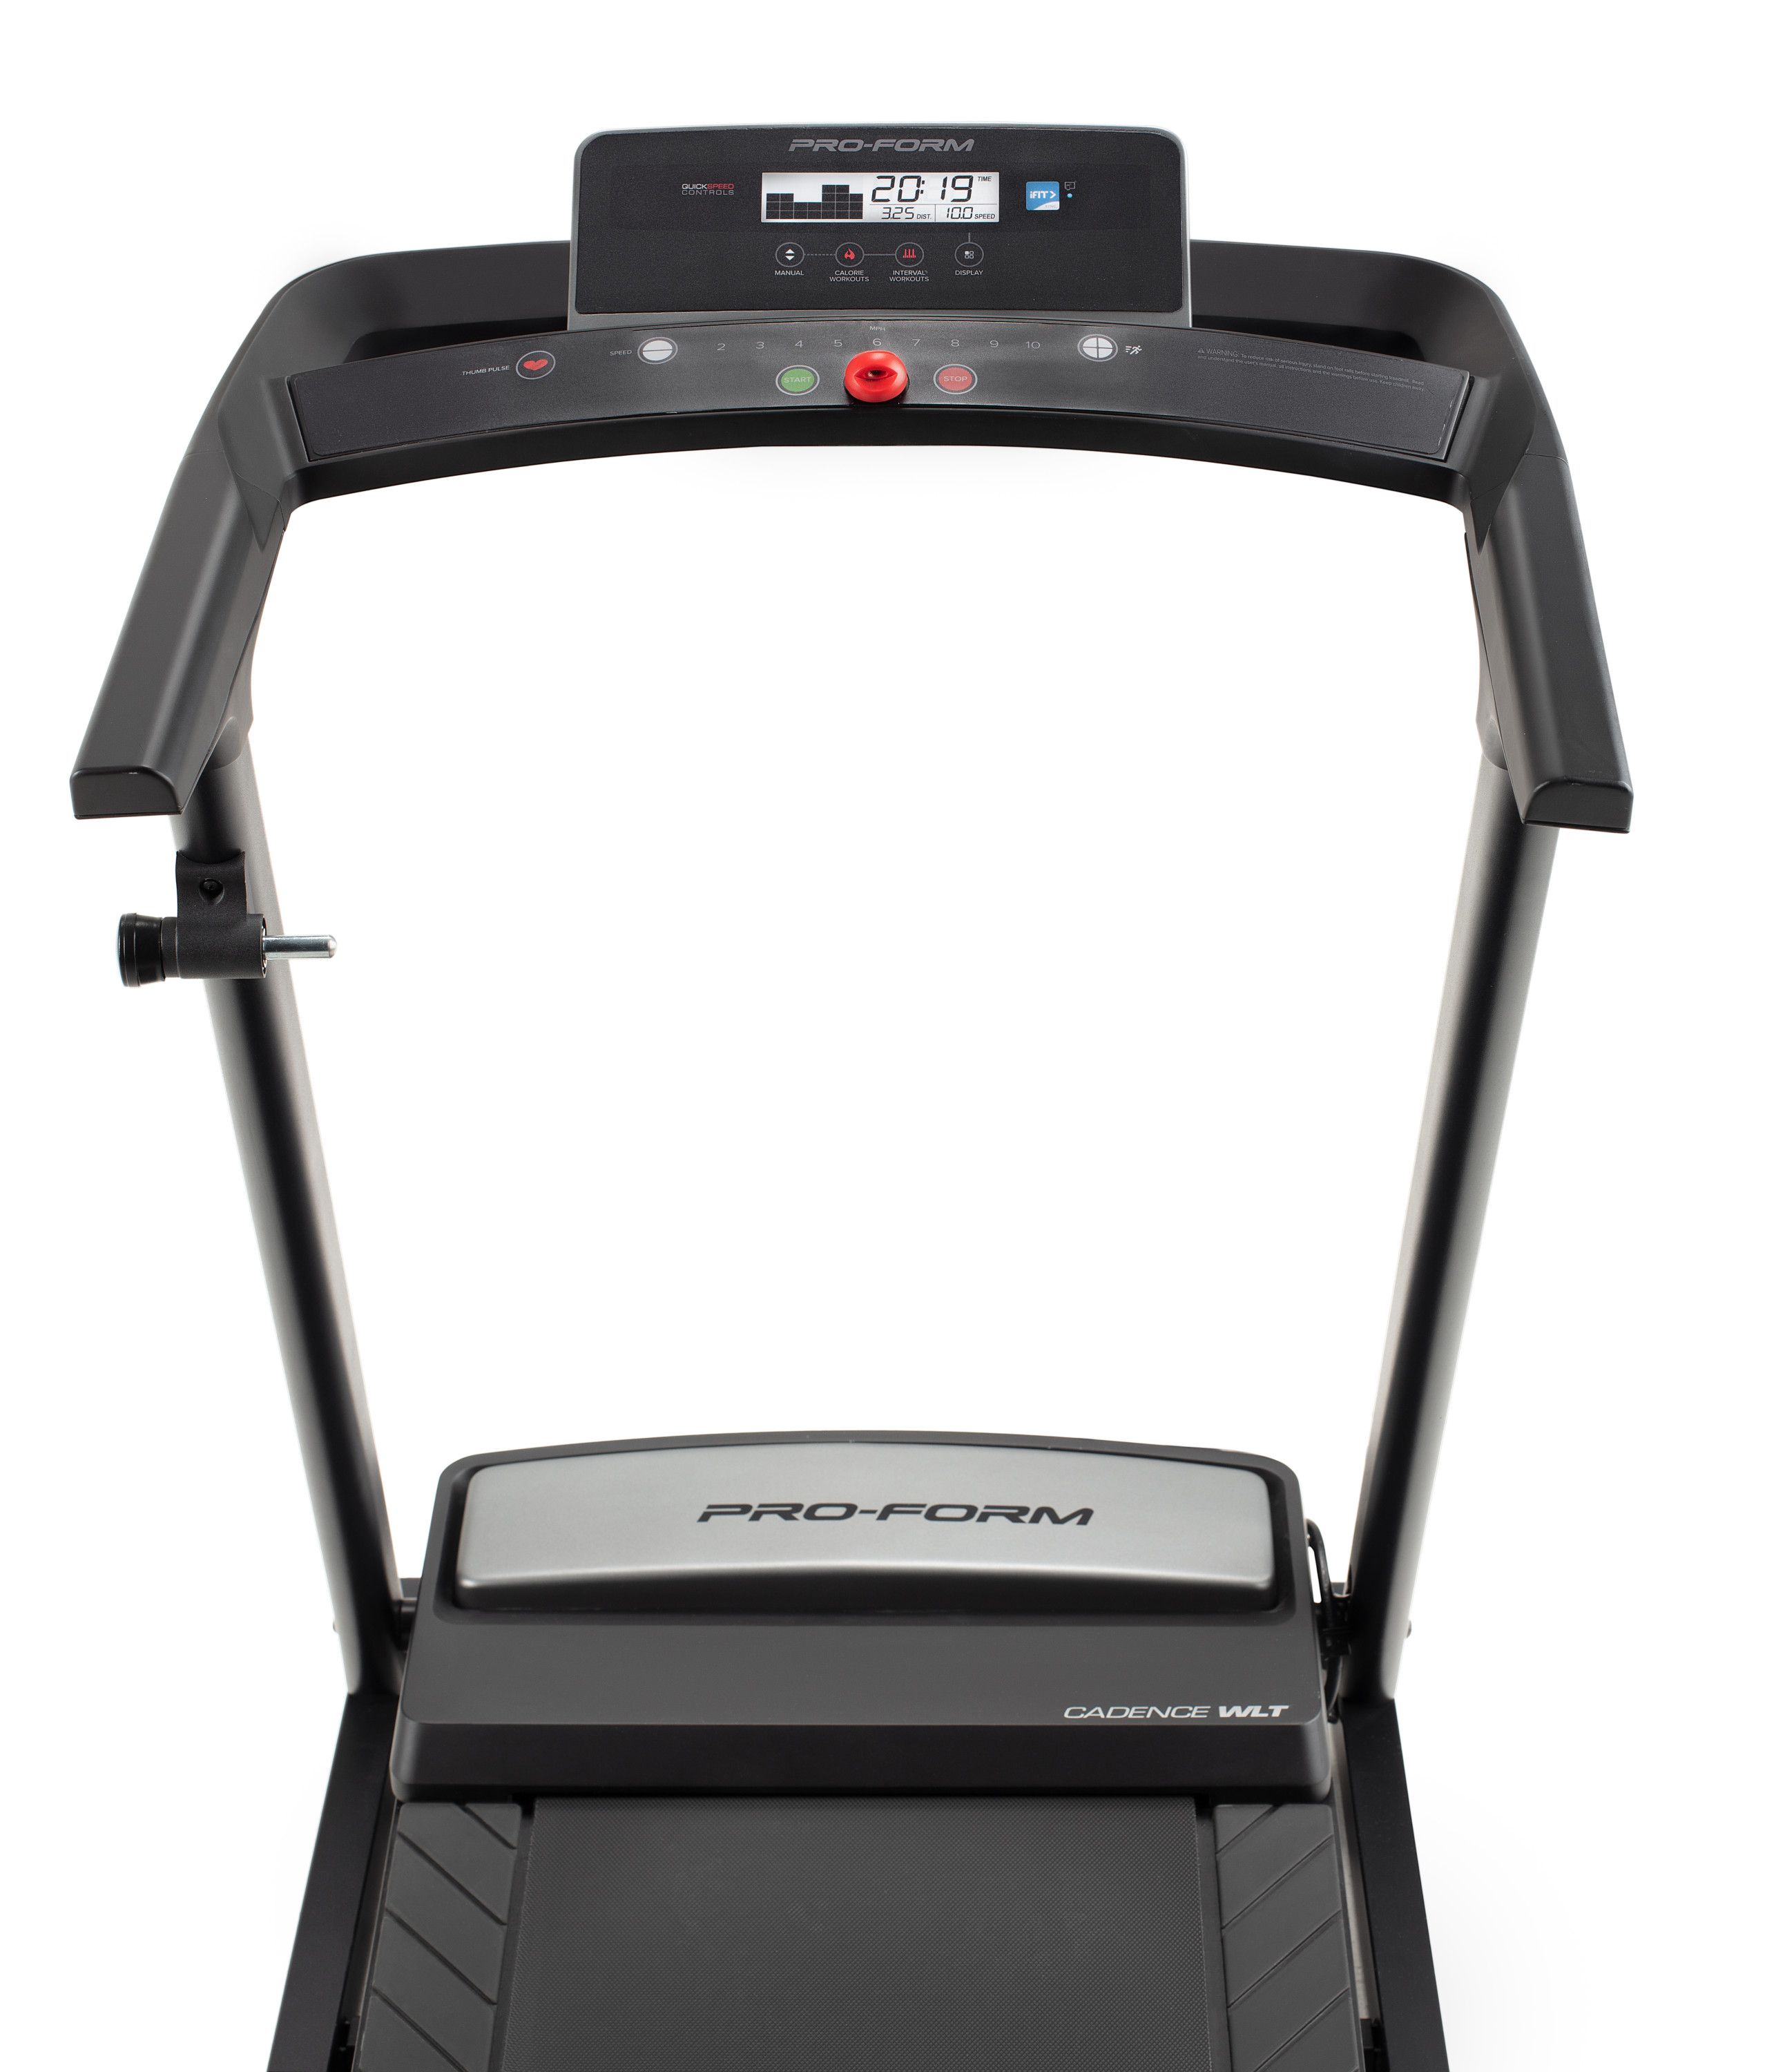 ProForm Cadence WLT Folding Treadmill with Reflex Deck for Walking and Jogging, iFit Bluetooth Enabled - image 12 of 31